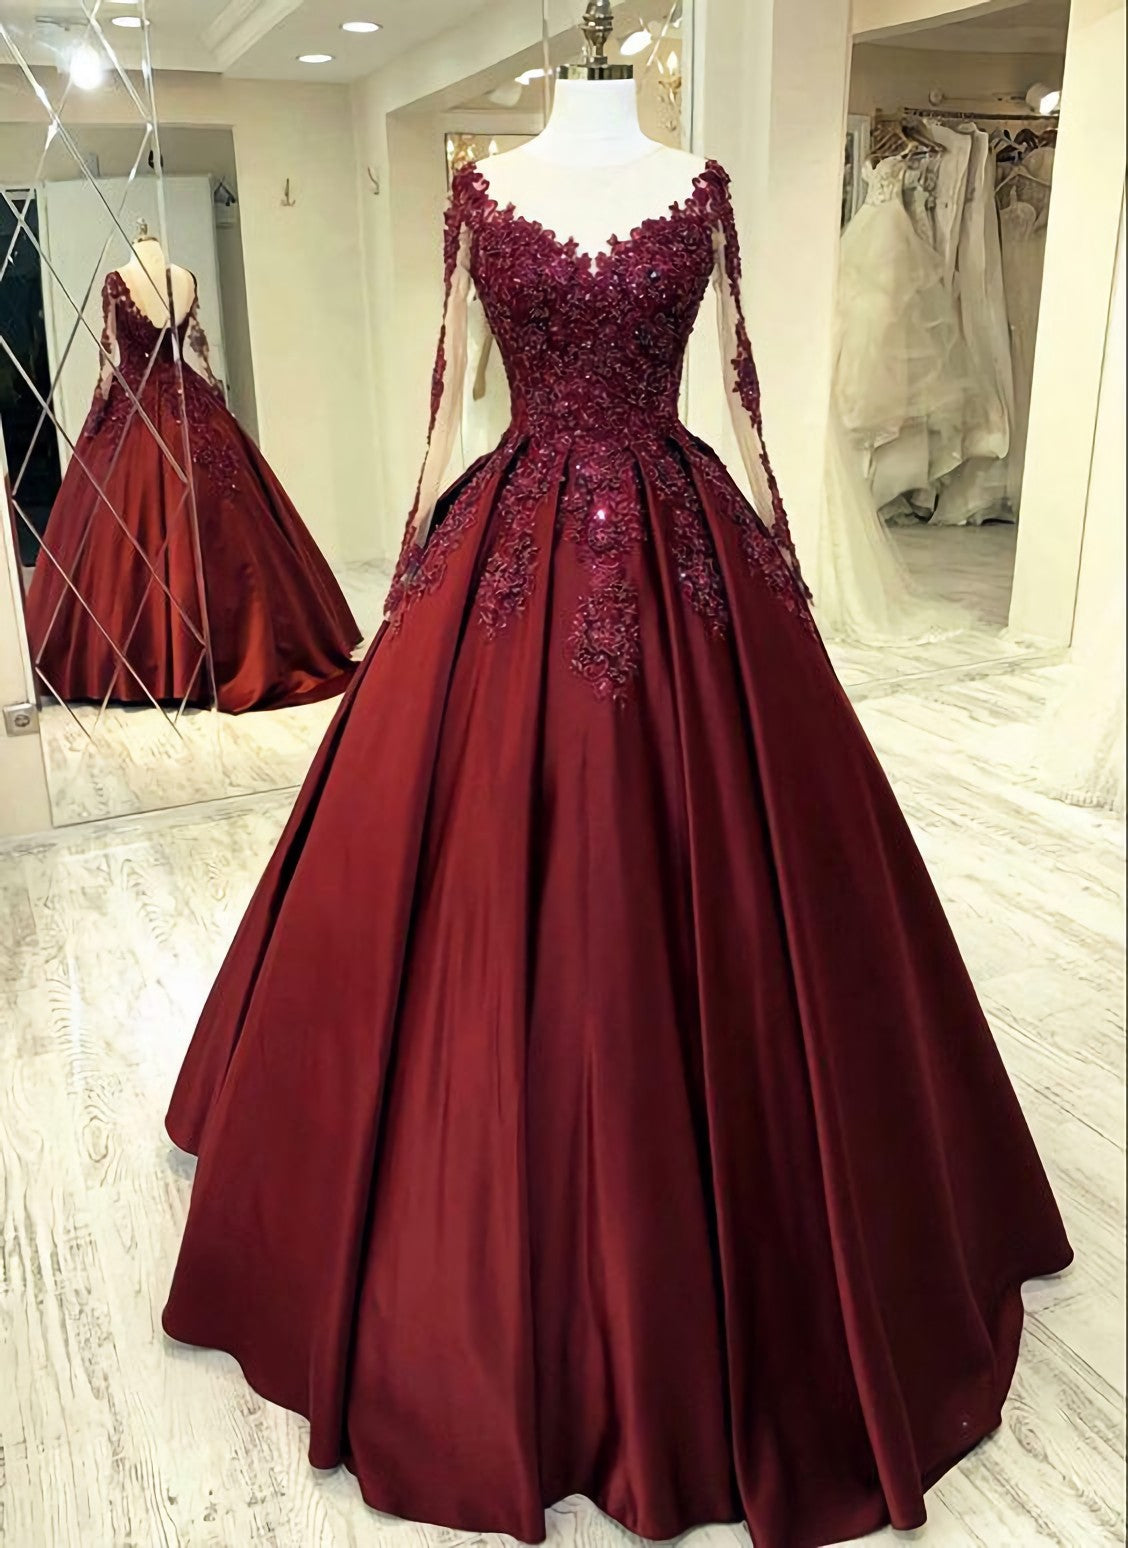 Elegant Burgundy Corset Wedding Dress, Lace Long Sleeves Corset Ball Gown Sheer Neckline For Women Corset Prom Dress, Evening Dress outfit, Wedding Dress For Bridesmaid